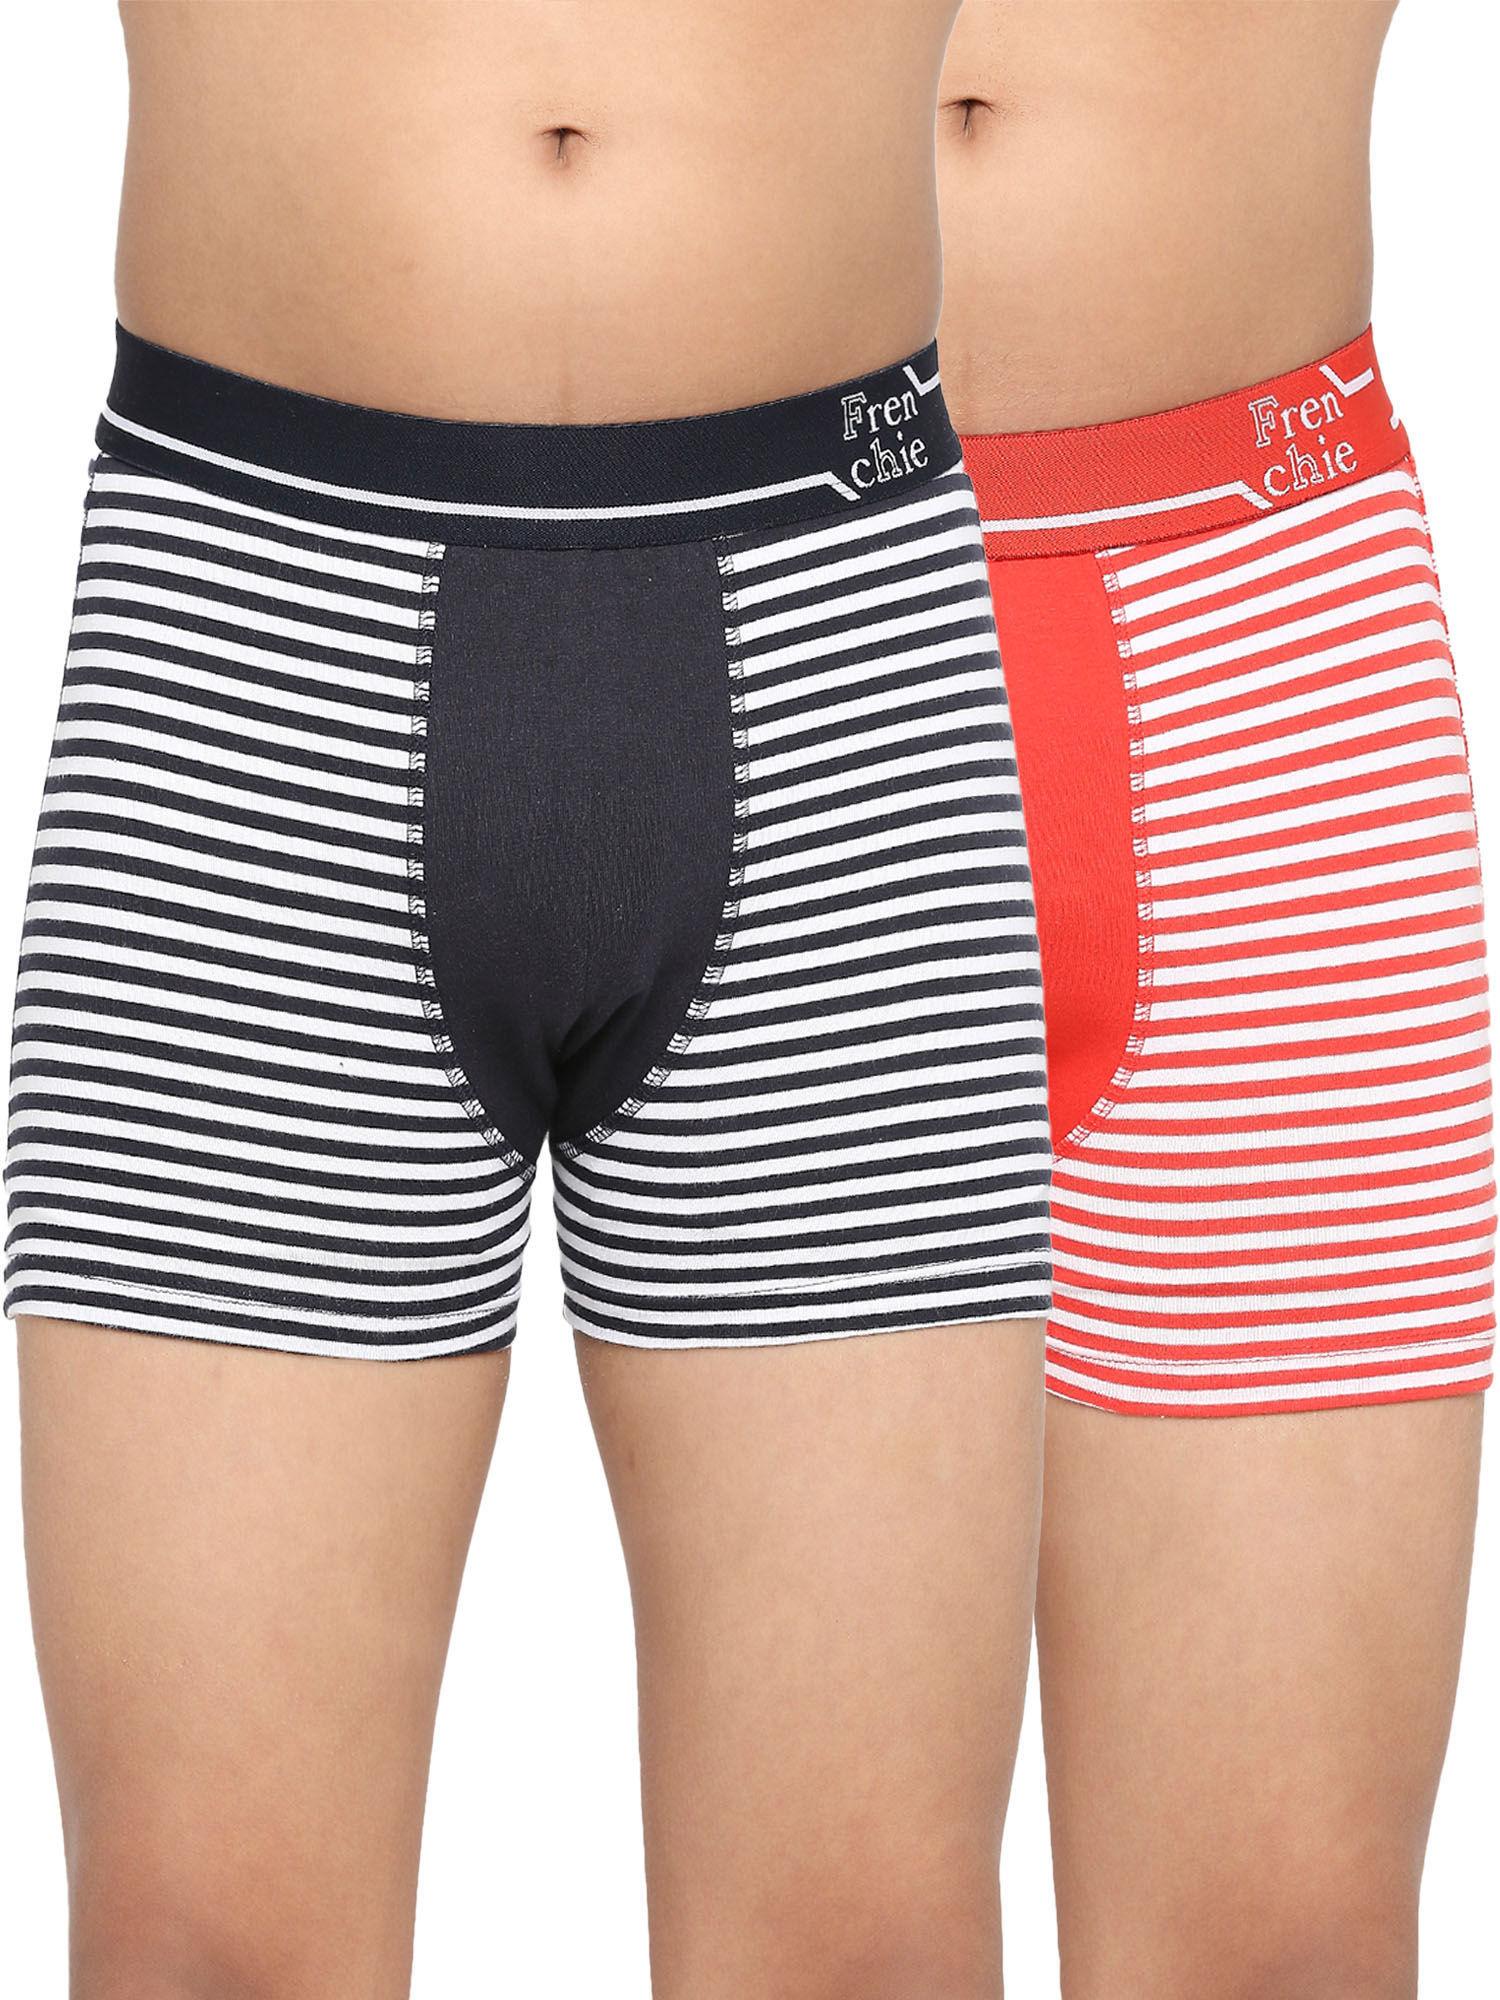 teenagers-cotton-trunk-navy-blue-and-red-(pack-of-2)